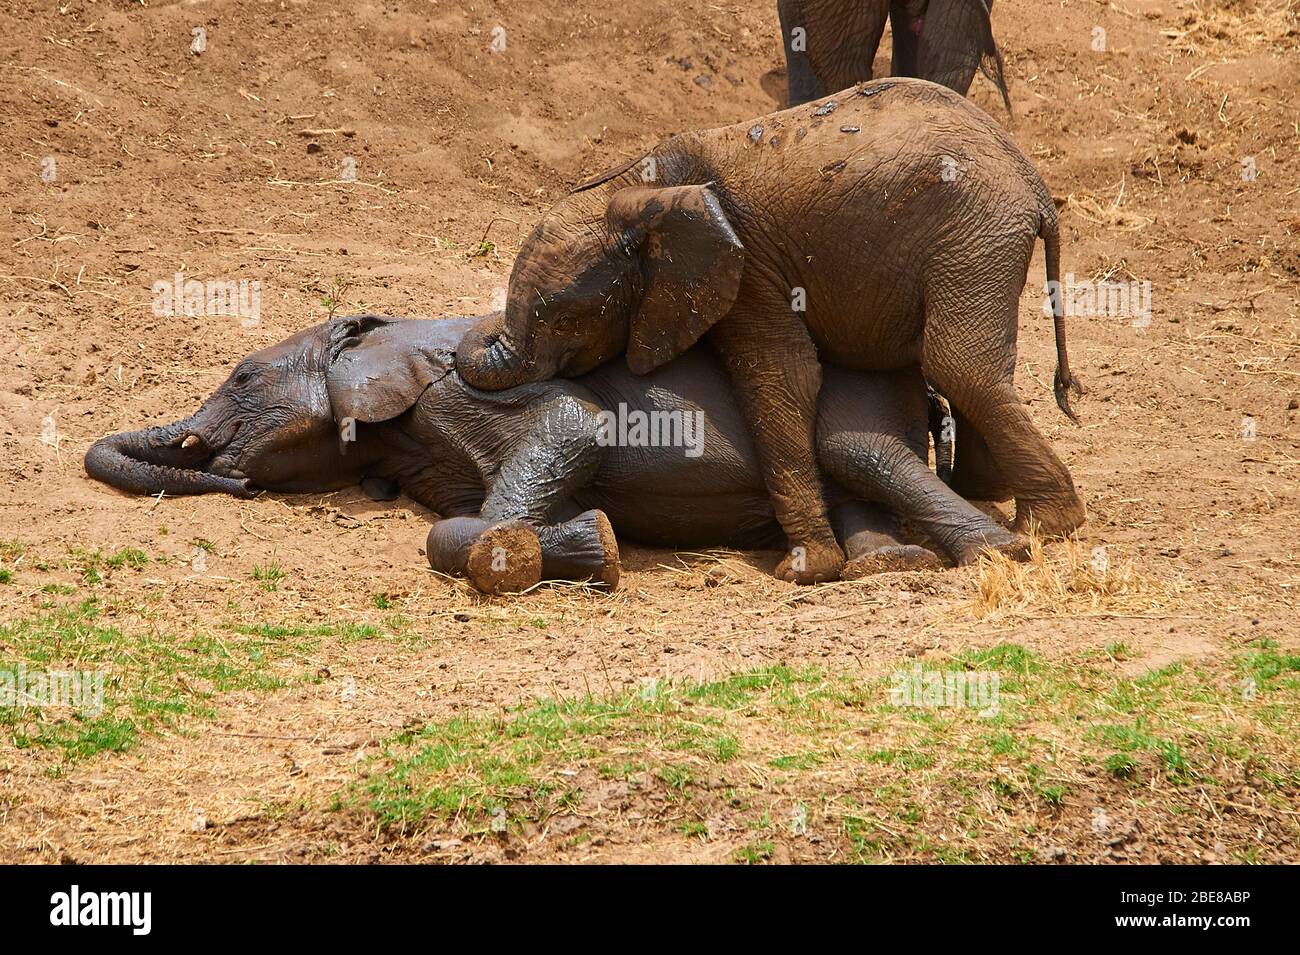 Young elephant calf, fooling around in a playful game Stock Photo